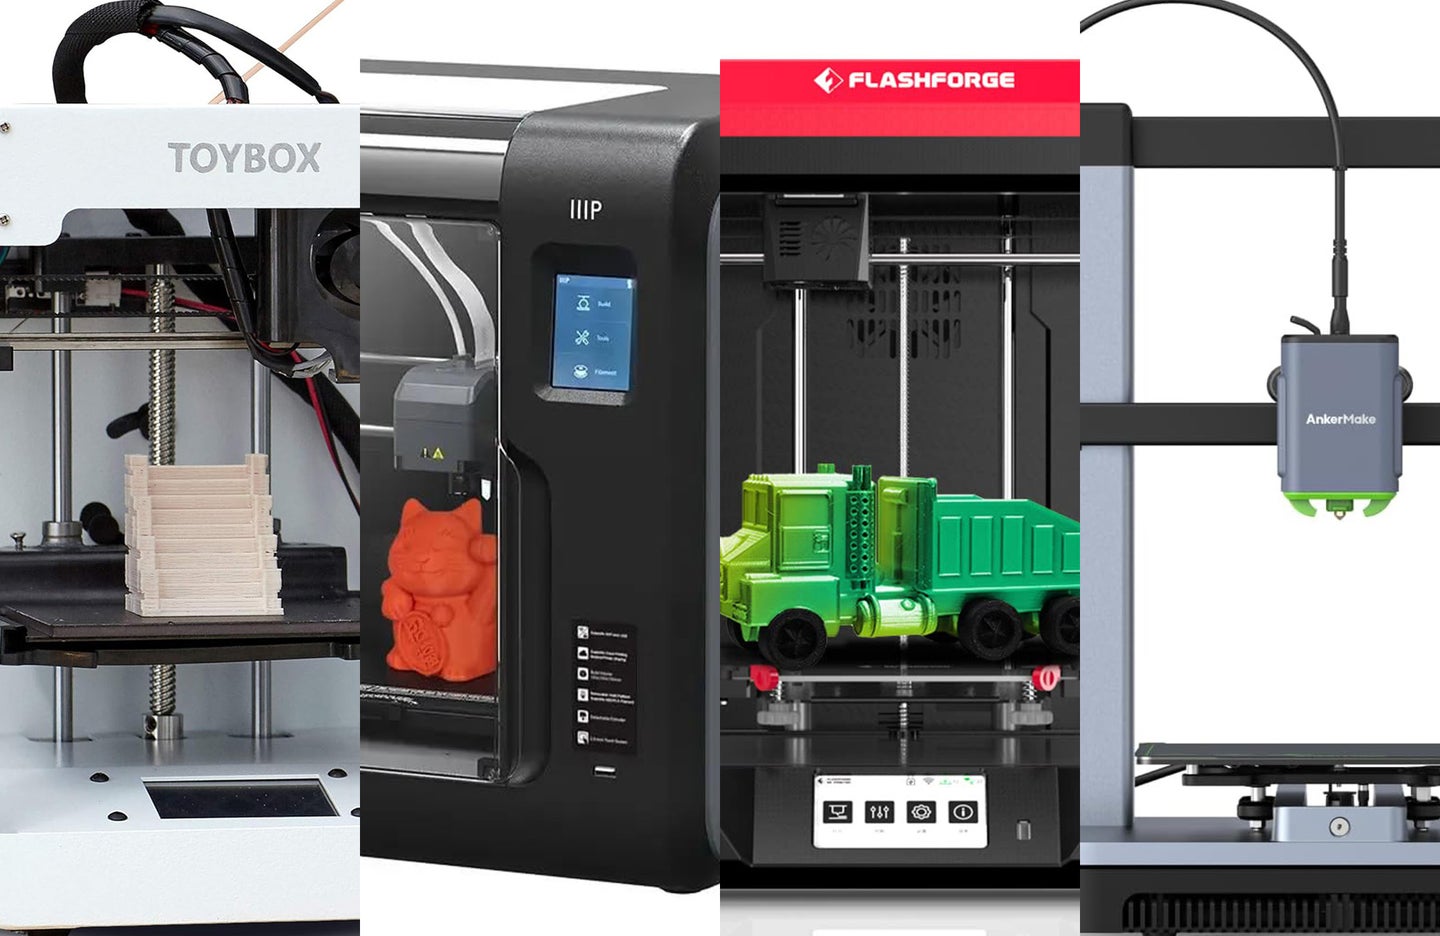 Four of the best 3D printers for kids are sliced together against a white background.